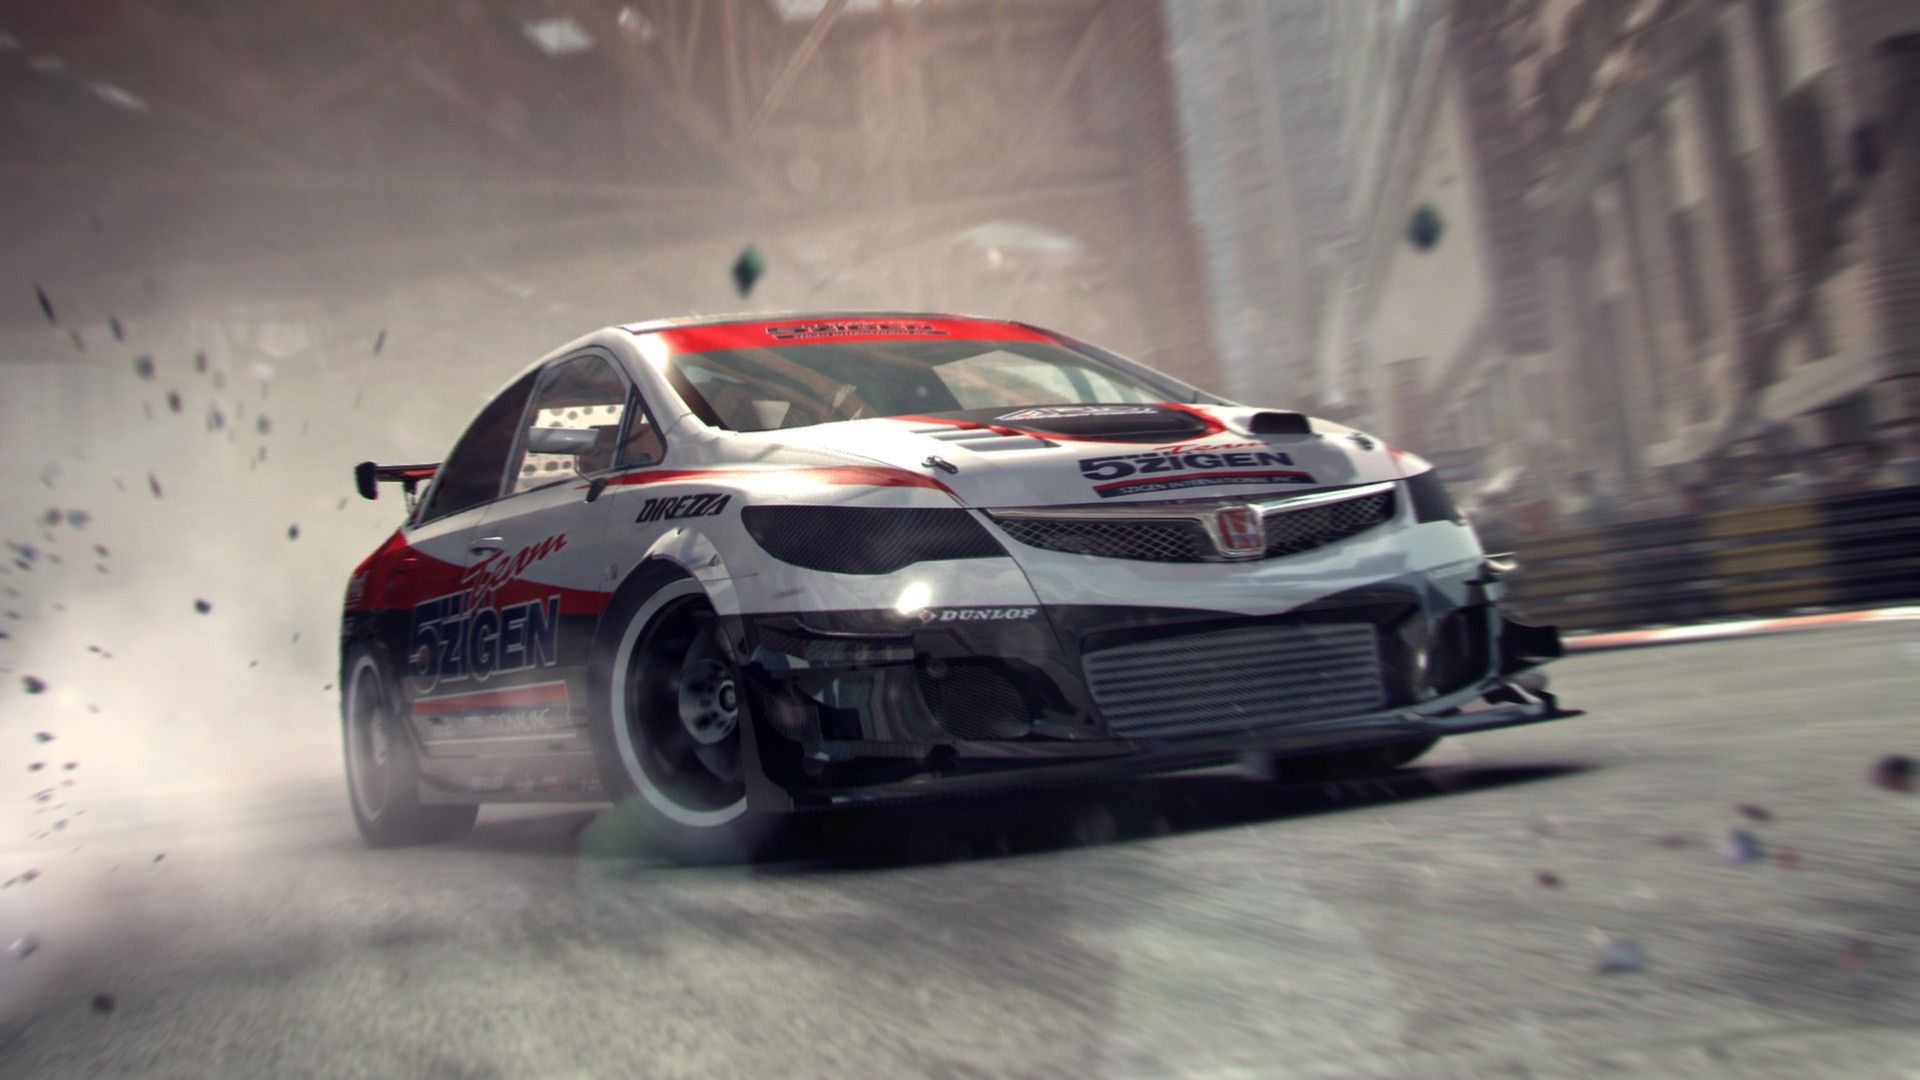 GRID 2 PS3 Delisted From PS Store